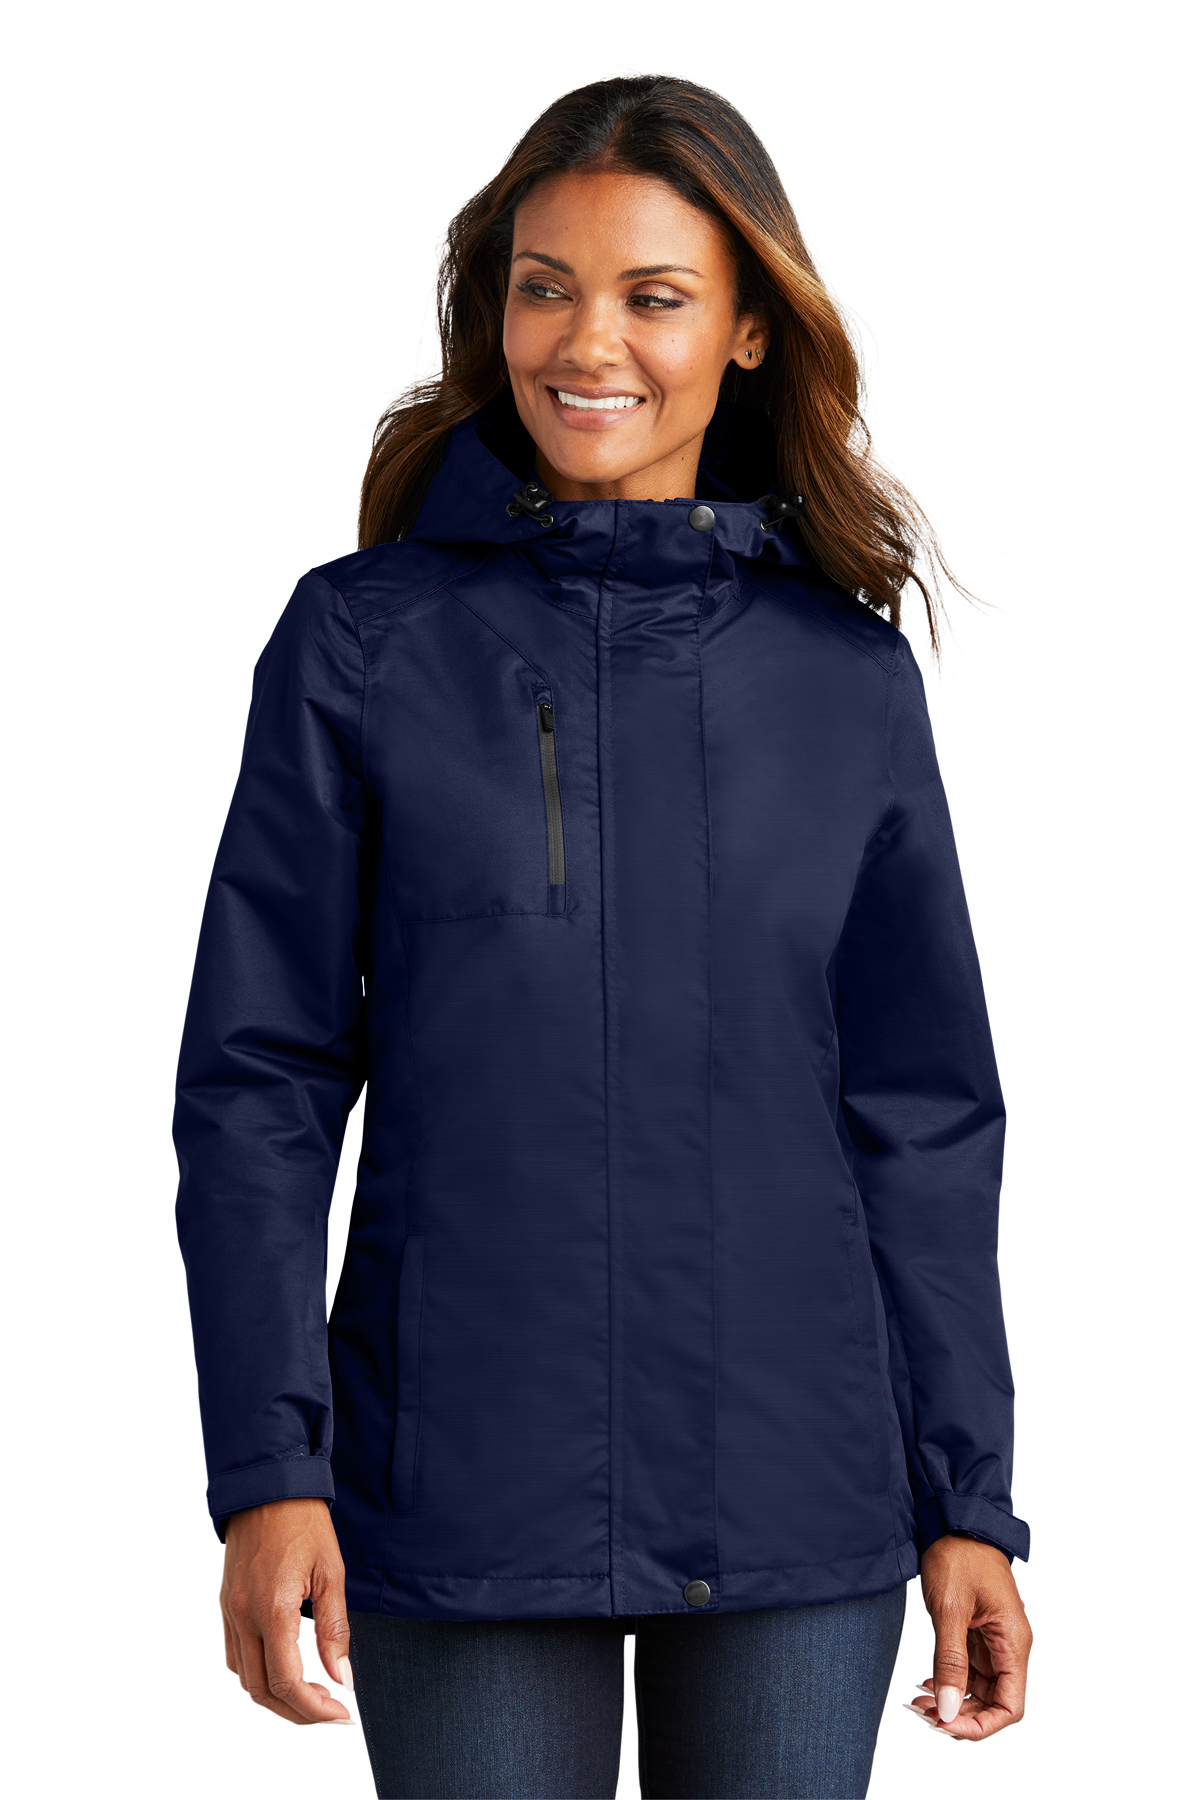 Port Authority Ladies All-Conditions Jacket, Product